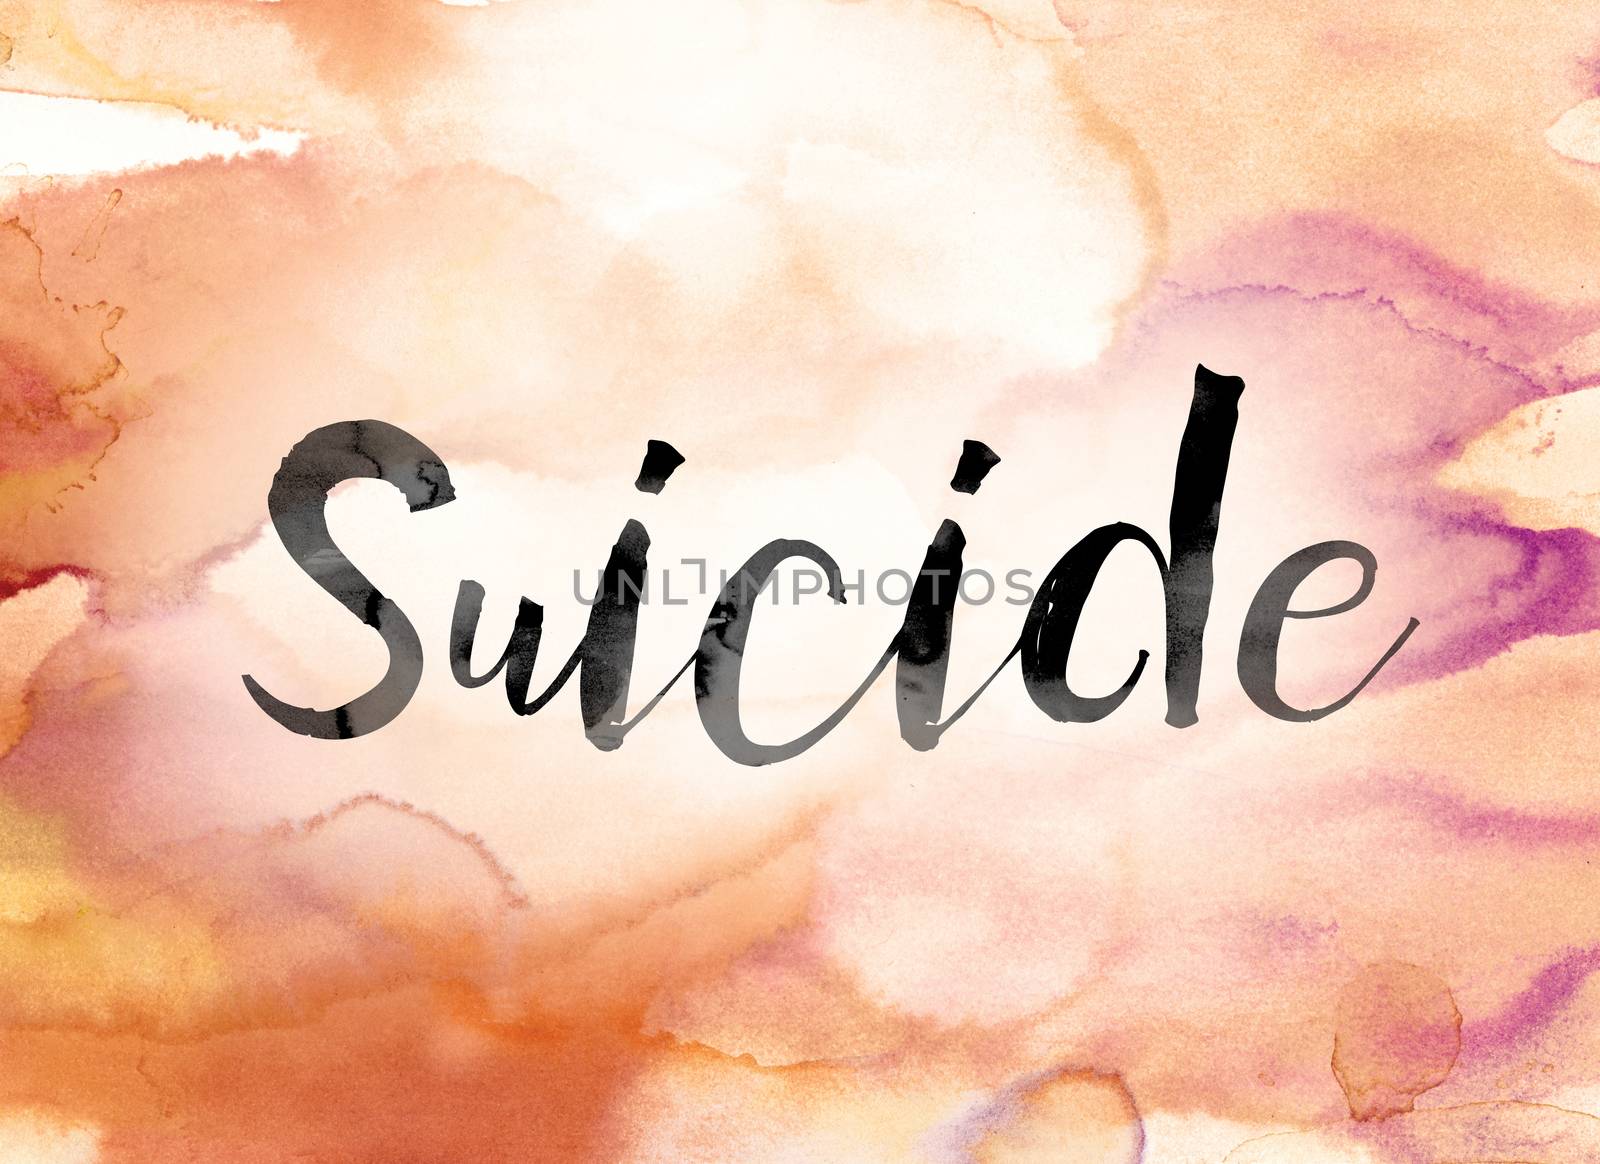 The word "Suicide" painted in black ink over a colorful watercolor washed background concept and theme.